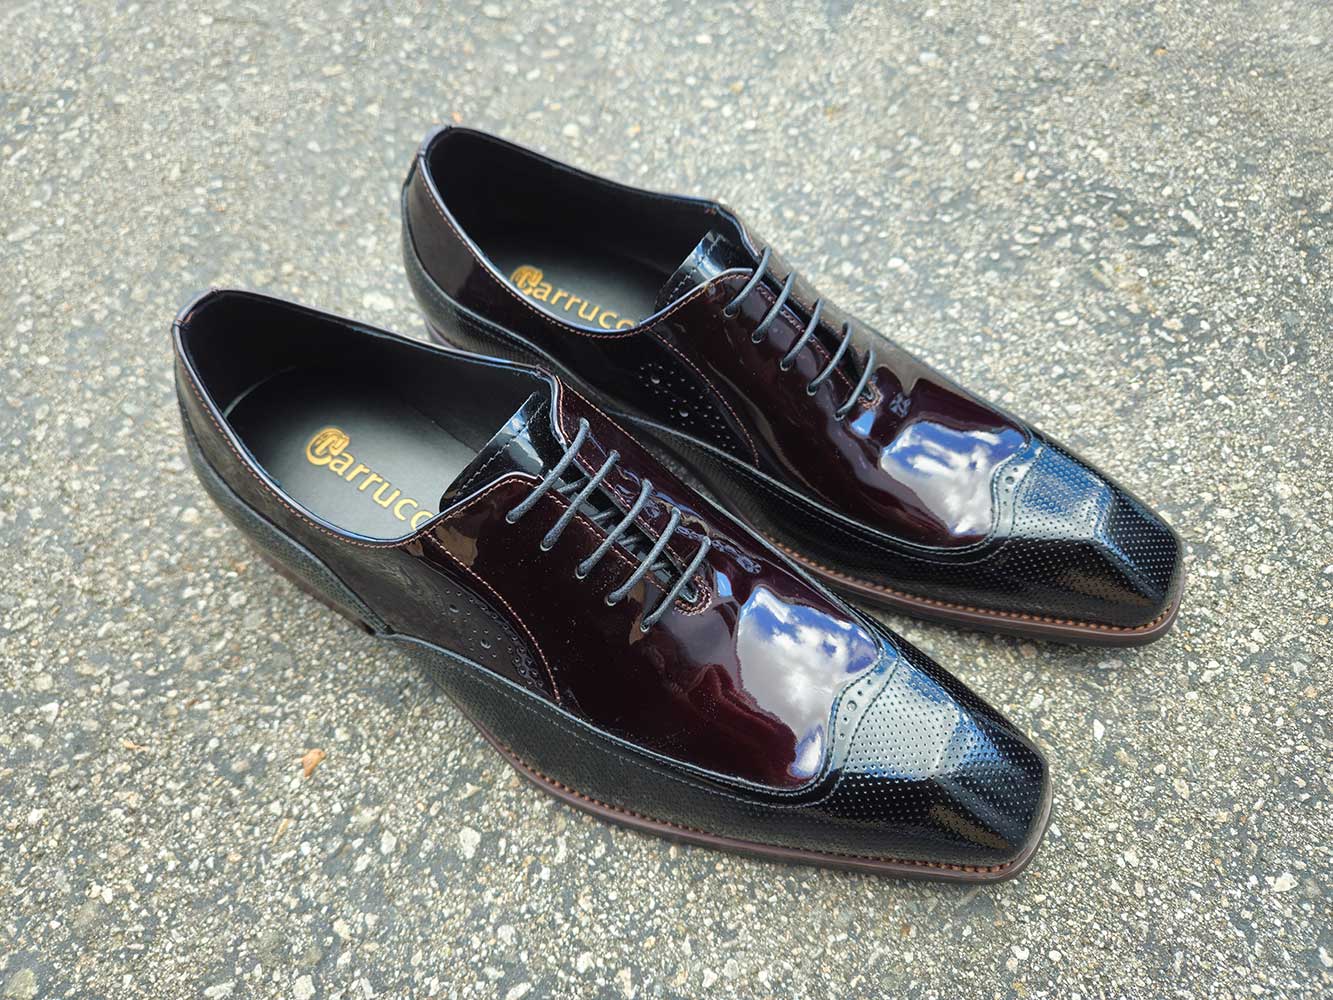 Modern Patent Leather Oxford